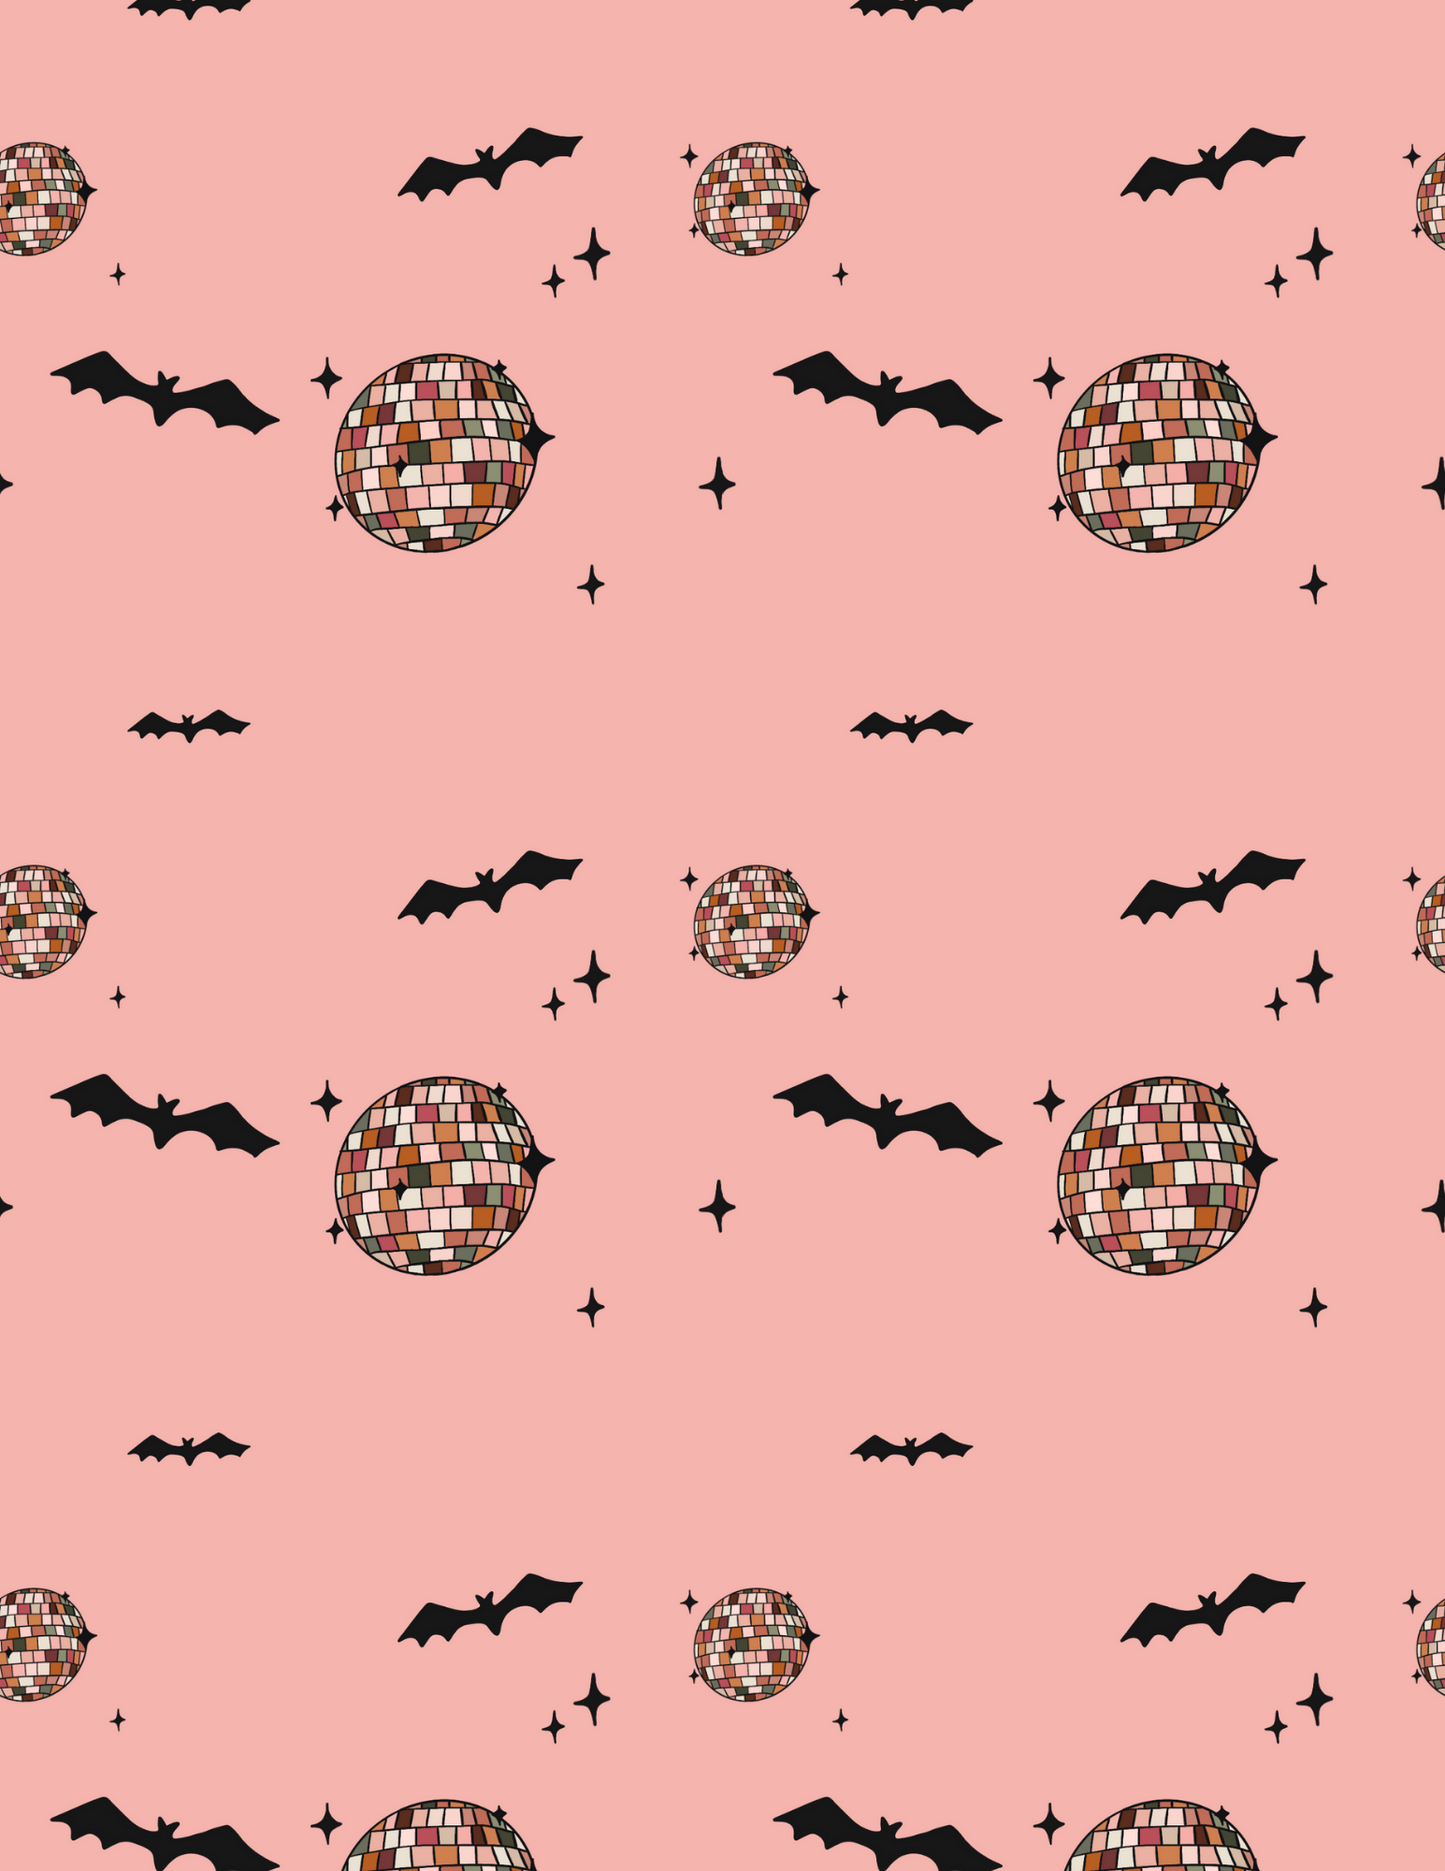 Halloween patterns| Repeatable patterns